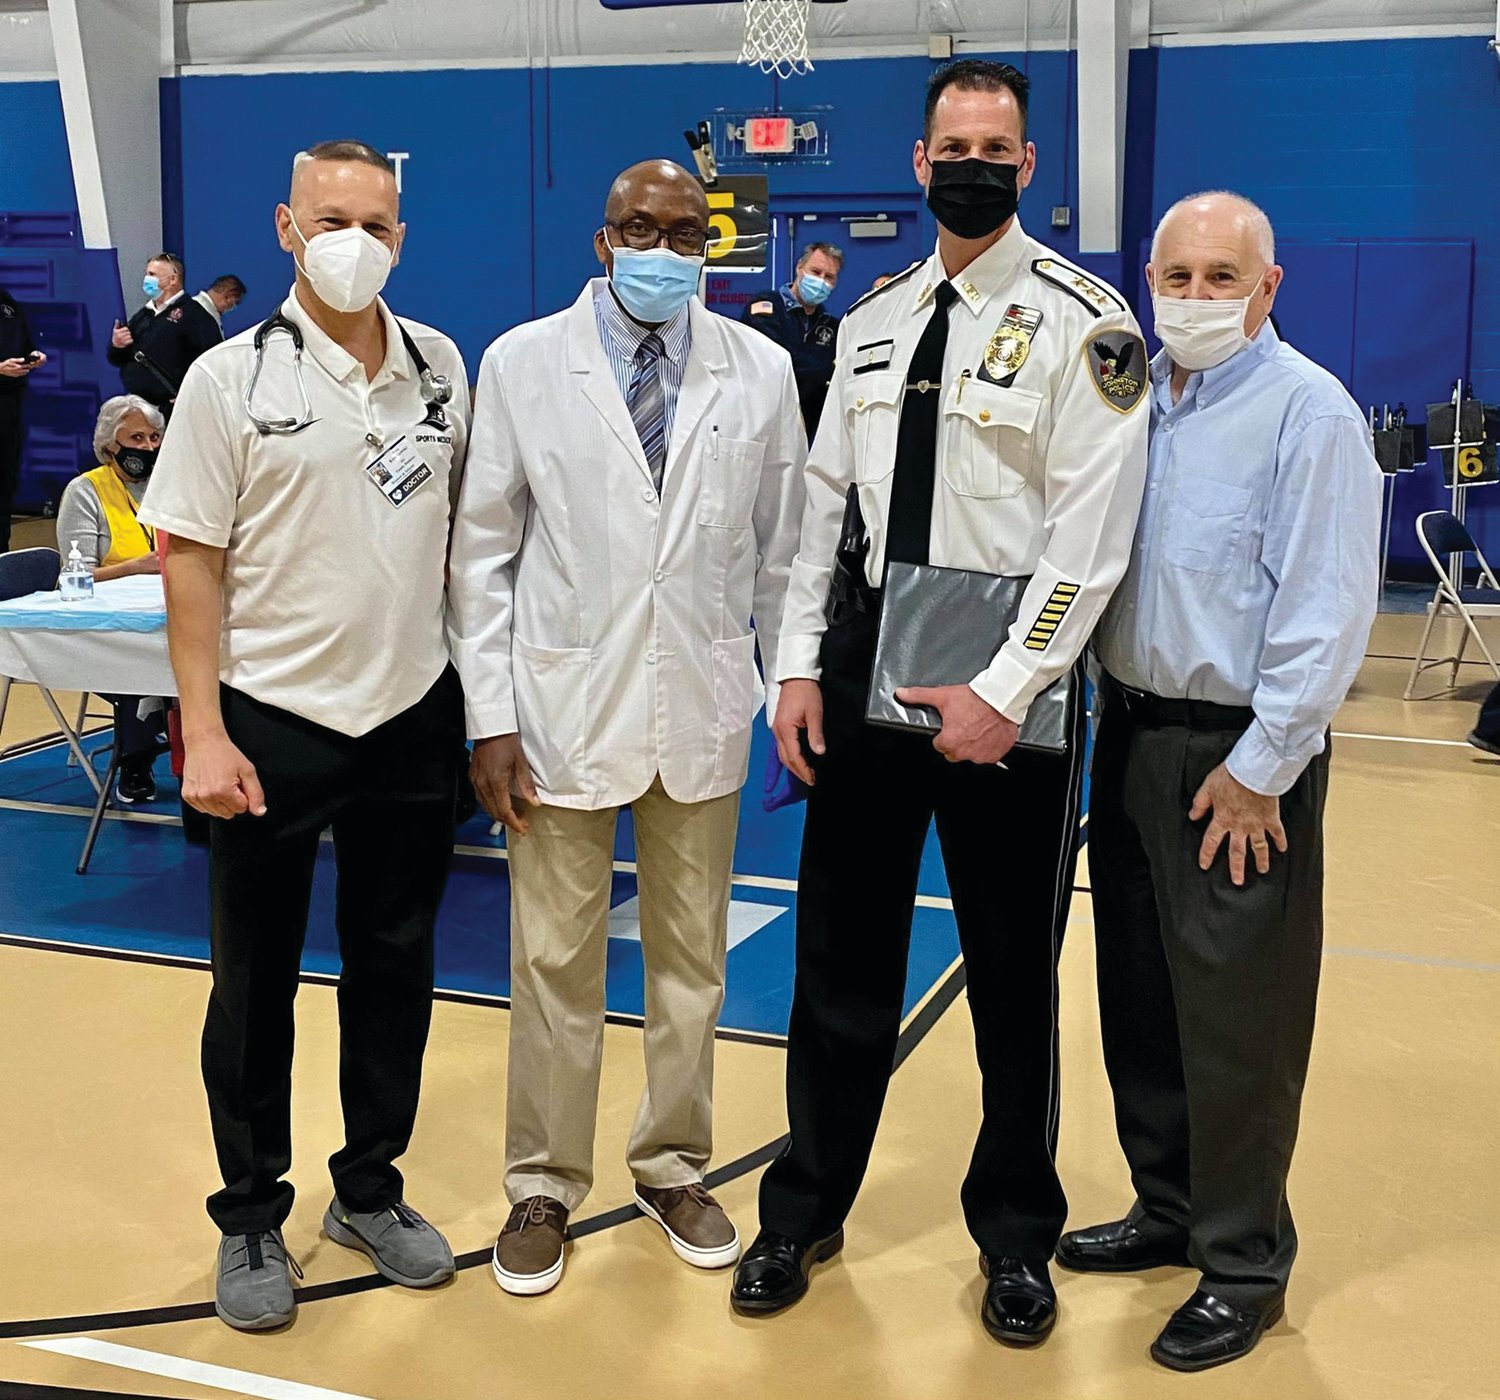 CALL ANSWERED: The Rev. Dr. Christopher Abhulime (second from left) helped provide vaccination shots during last week’s vaccination clinic held at the Indoor Recreation Center. He is joined by Dr. Brian Kwetkowski, Johnston Police Chief Joseph Razza and Mayor Joseph Polisena.